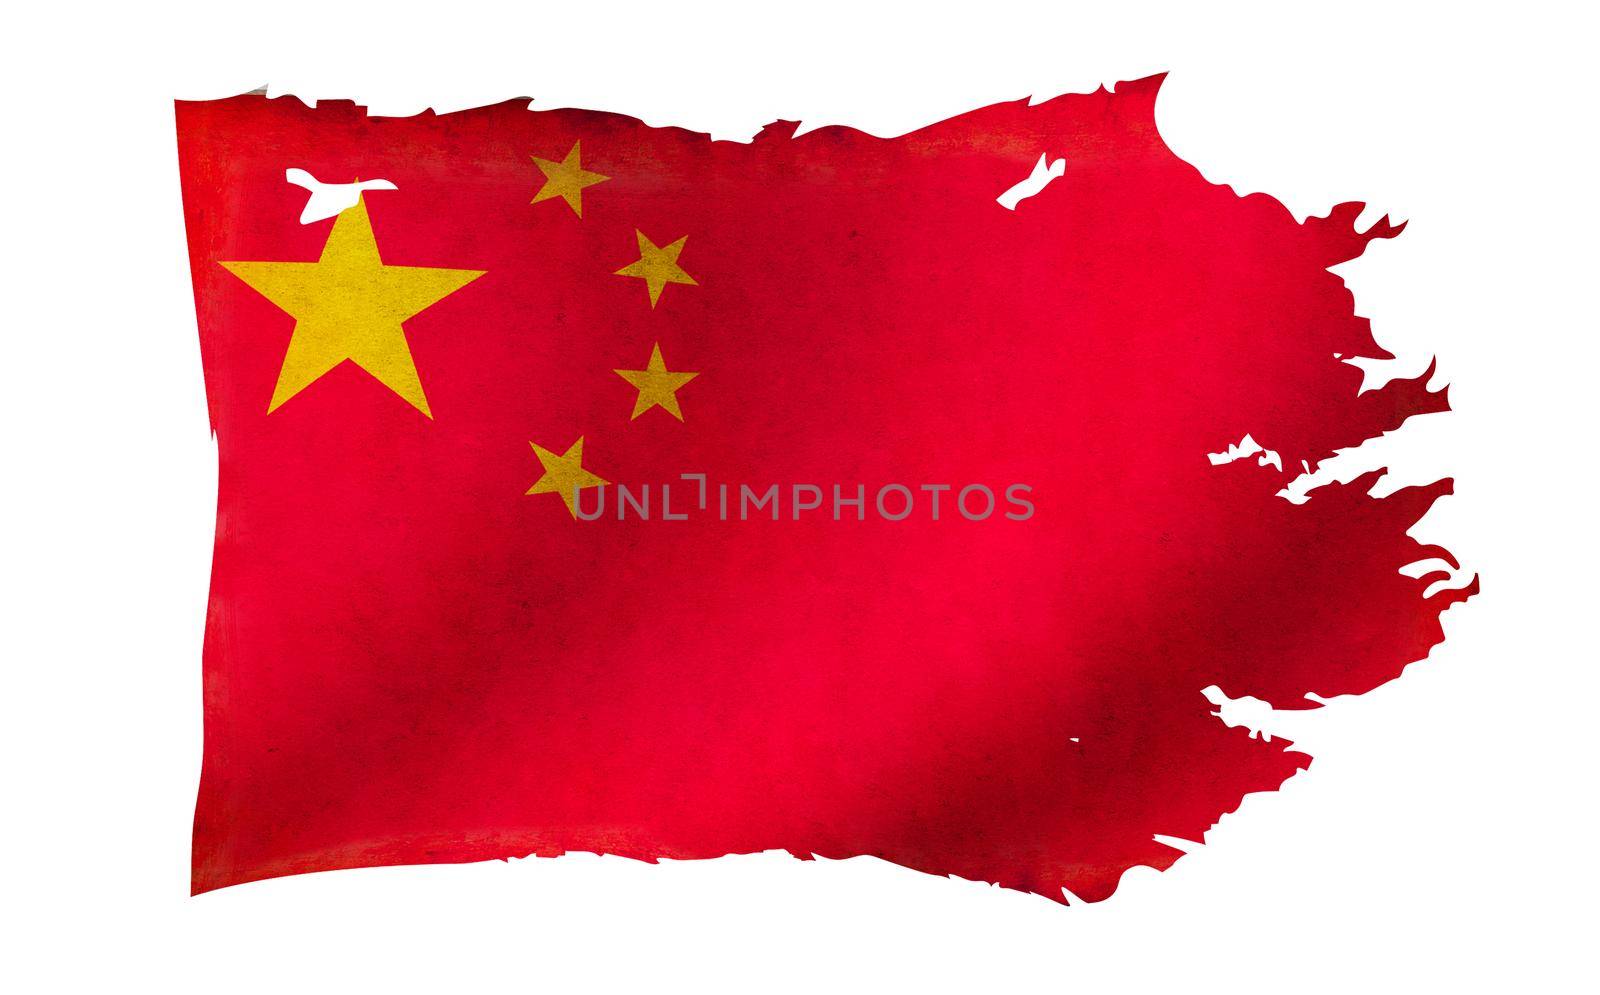 Dirty and torn country flag illustration / China by barks